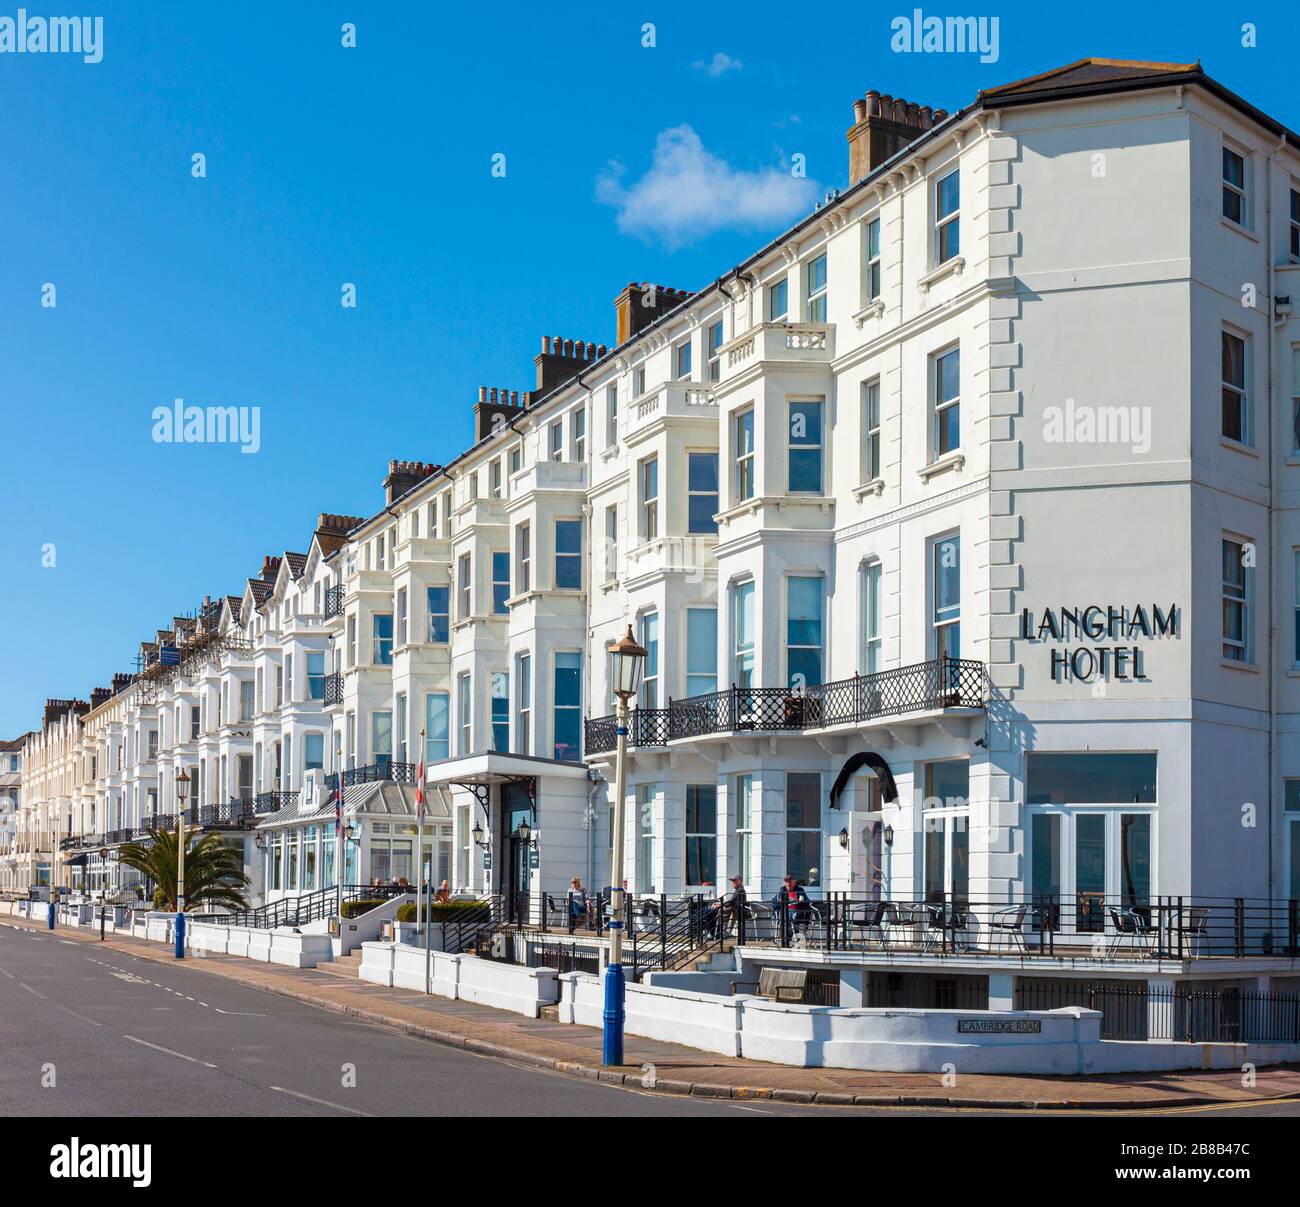 Row of Victorian terraced hotels, Royal Parade, Eastbourne, East Sussex, England, UK. Stock Photo